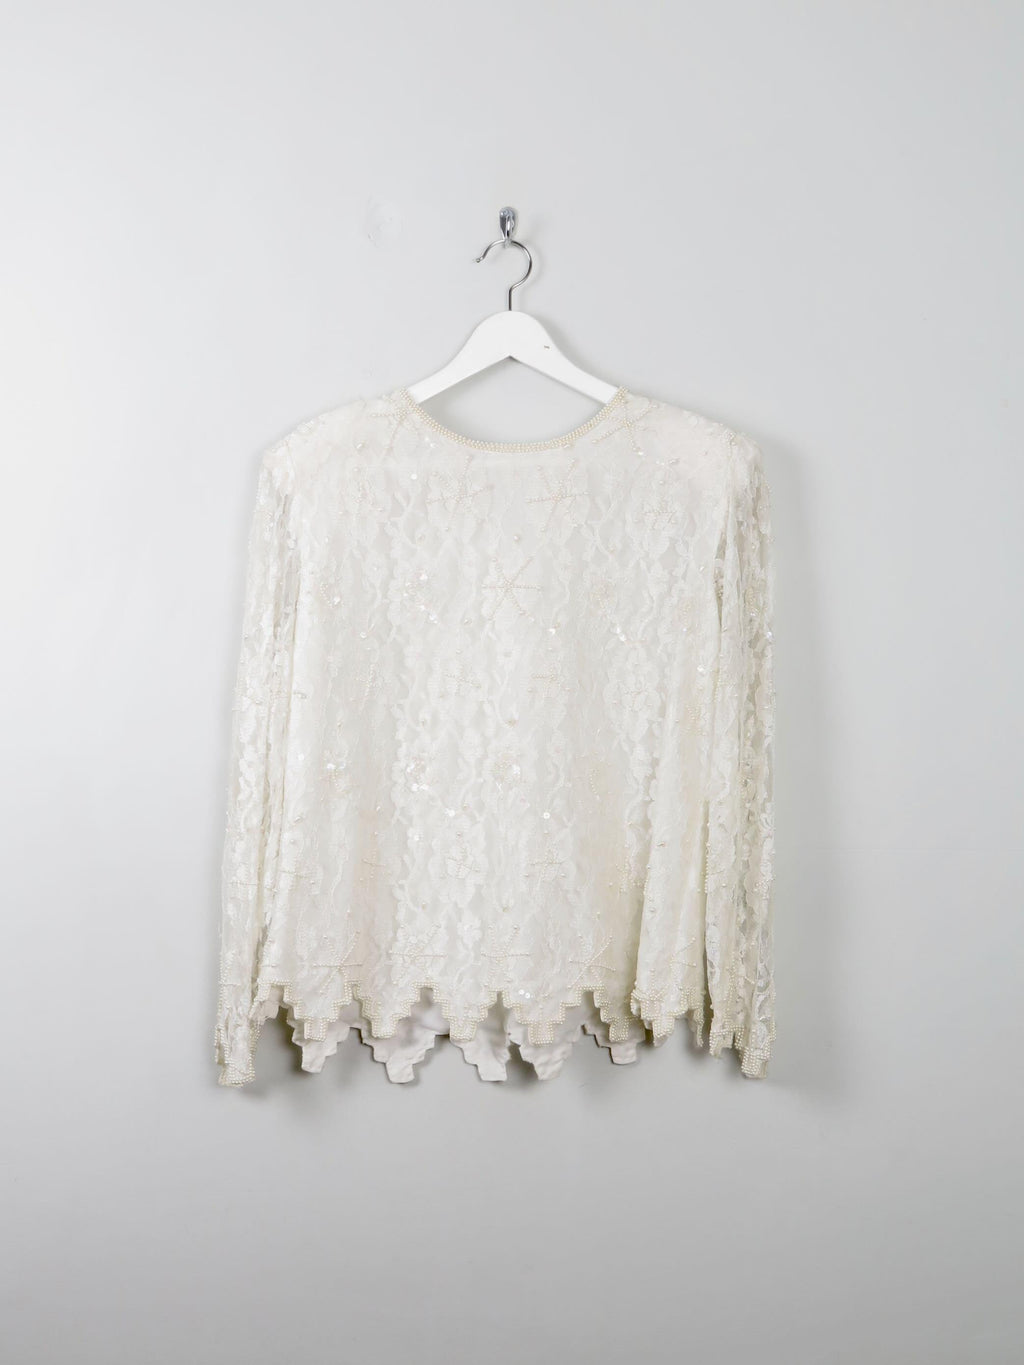 Women's Vintage Cream Lace & Beaded Top M/L - The Harlequin